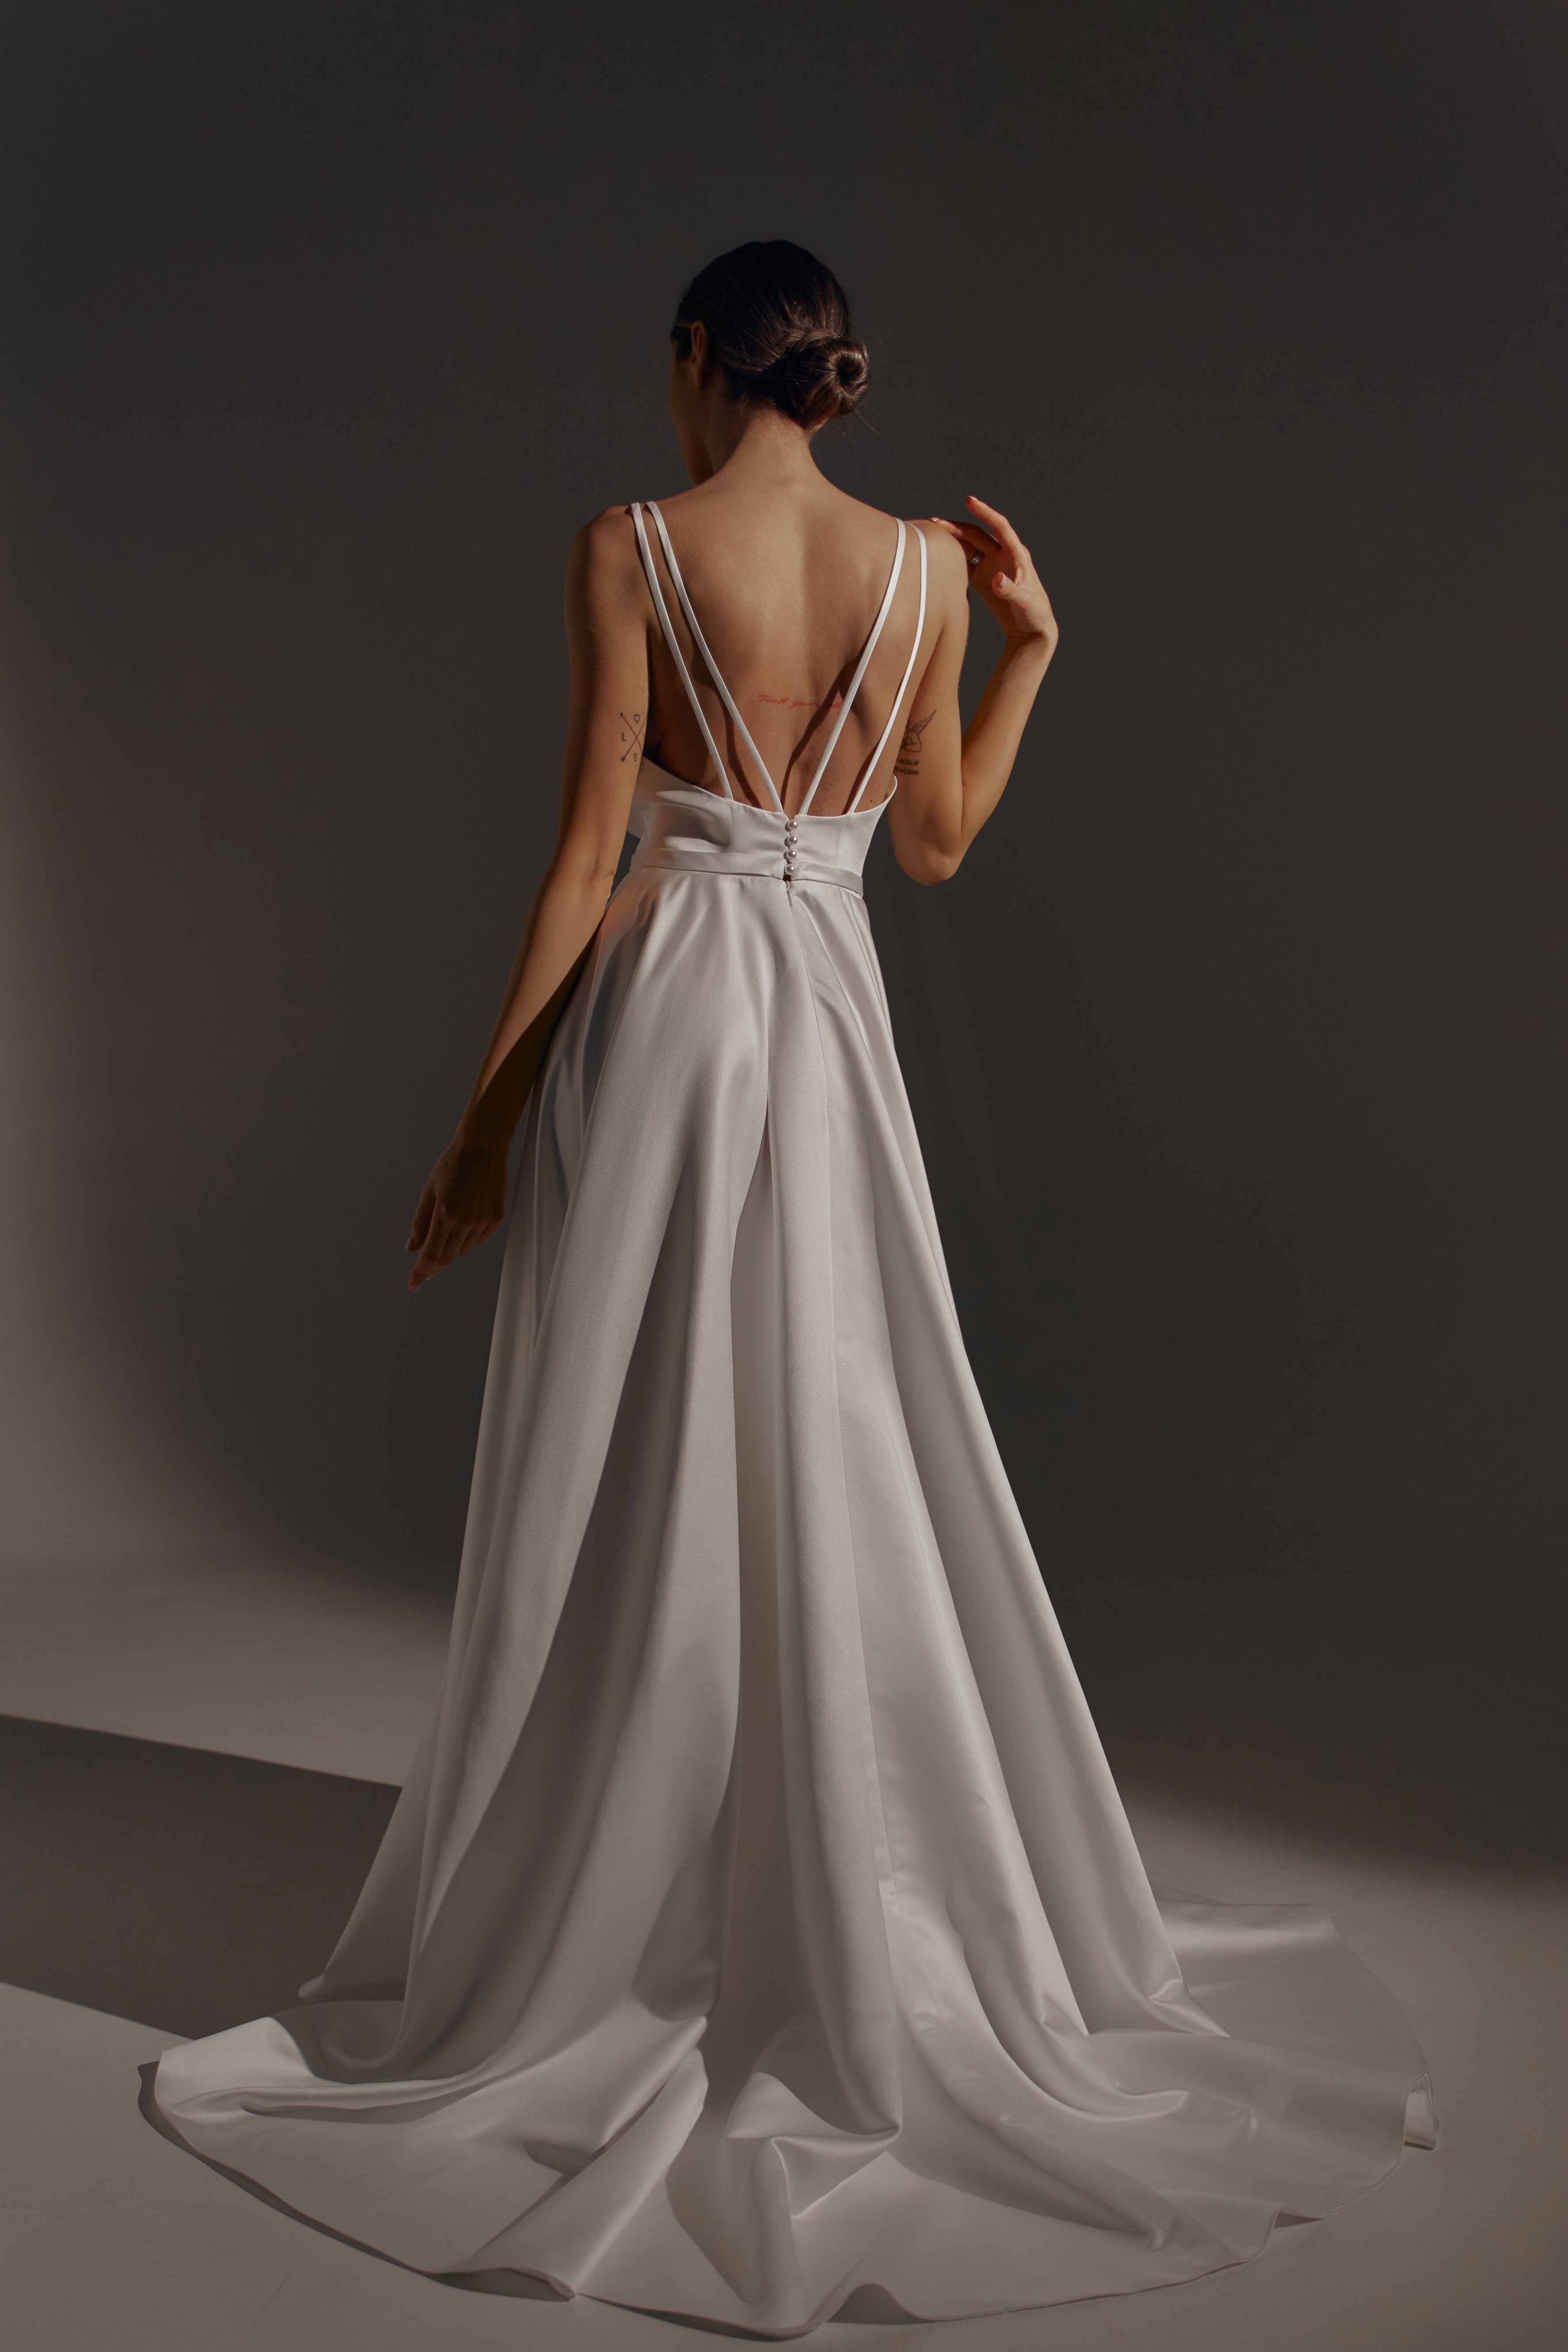 Learn About The Grecian Style Of Dressing | Grecian style wedding dress,  Wedding dress chiffon, Greek wedding dresses